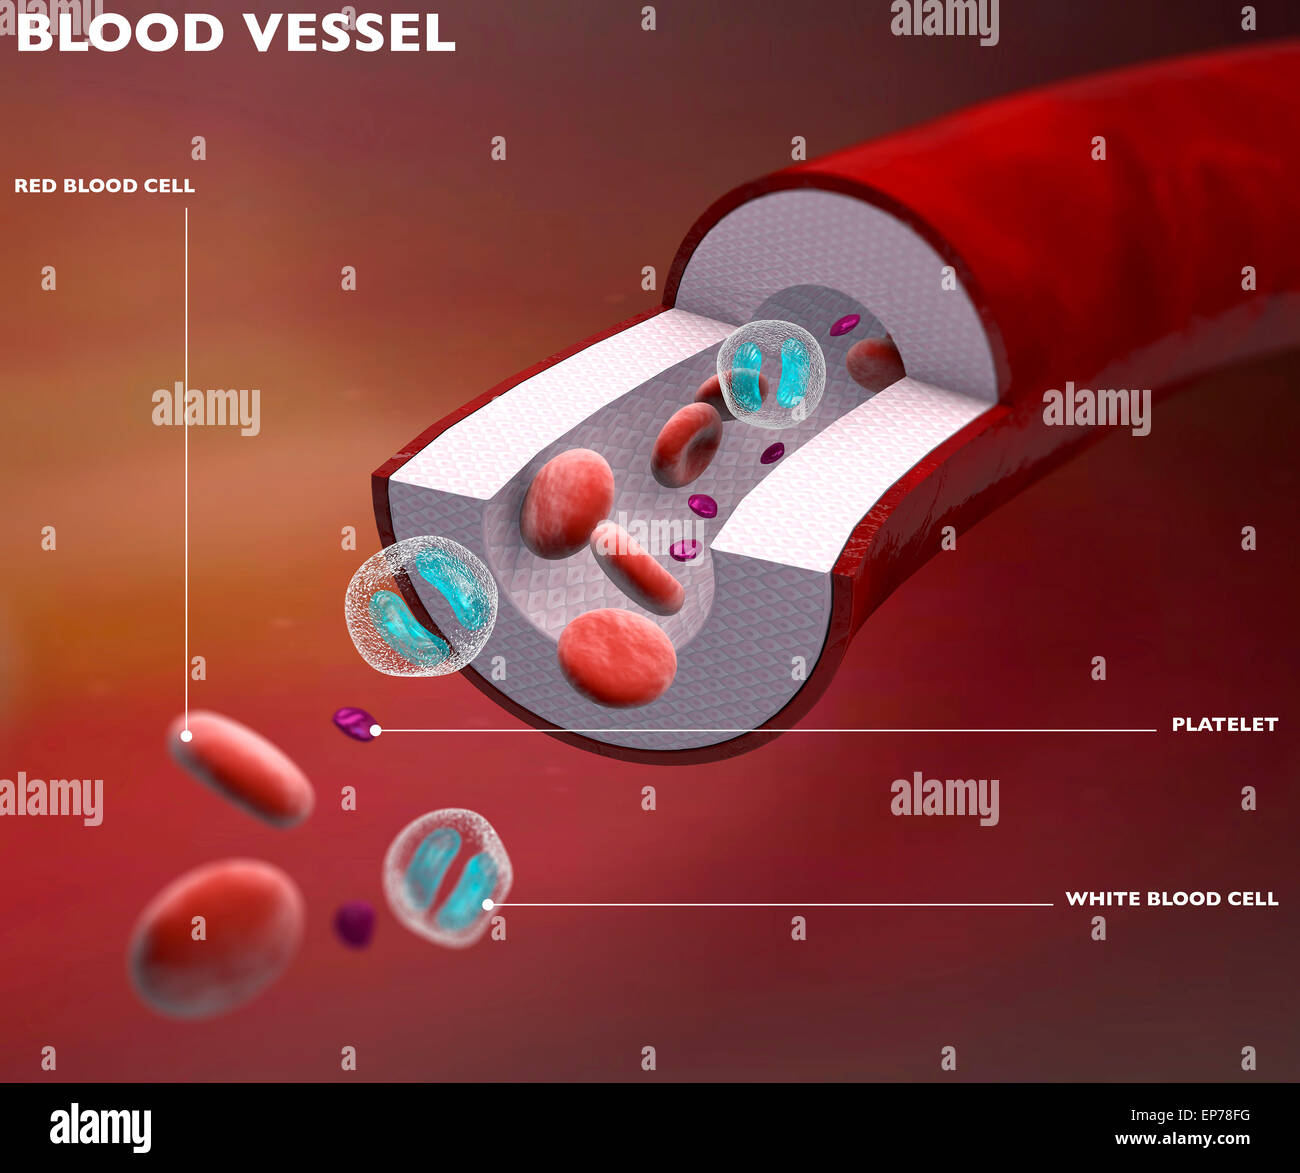 Section of blood vessel artery, vein, red blood cells on red background Stock Photo